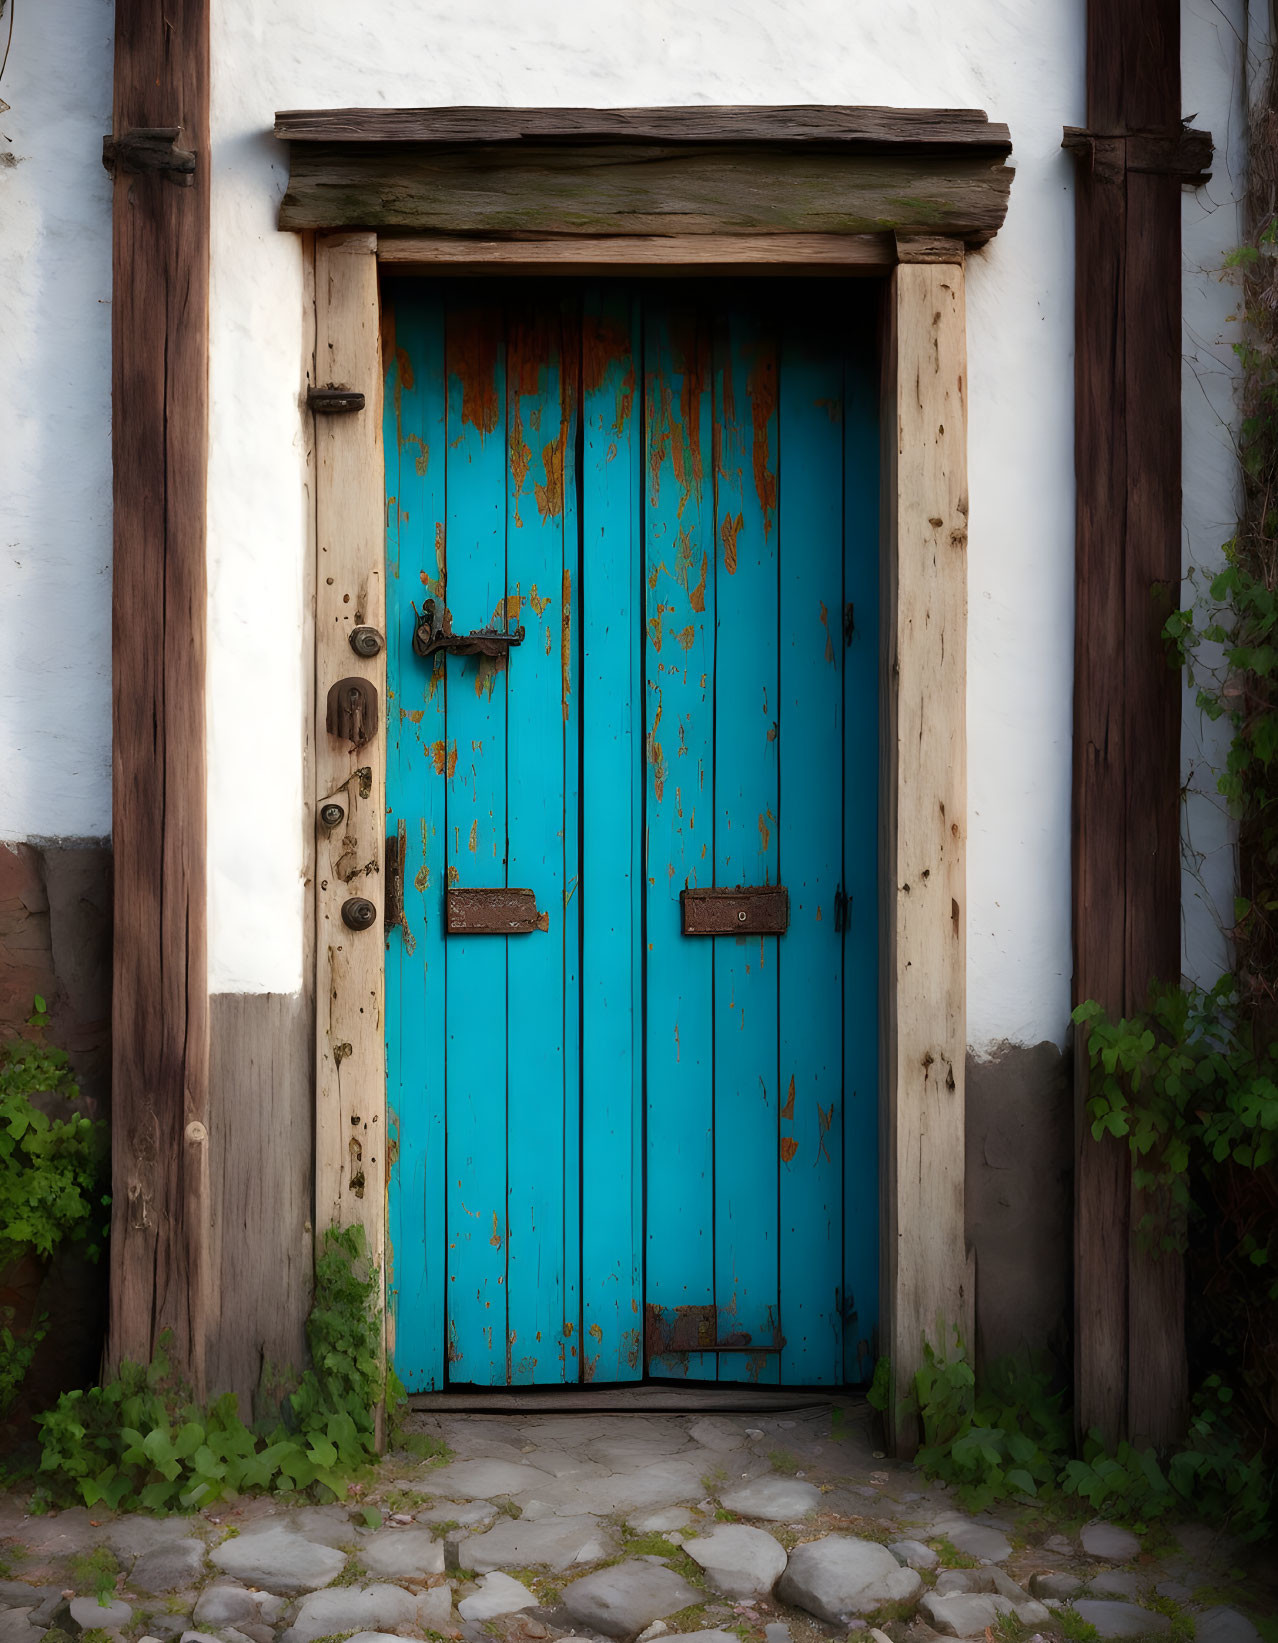 Weathered turquoise door with rusted metal fixtures in white wall, surrounded by cobblestones and green